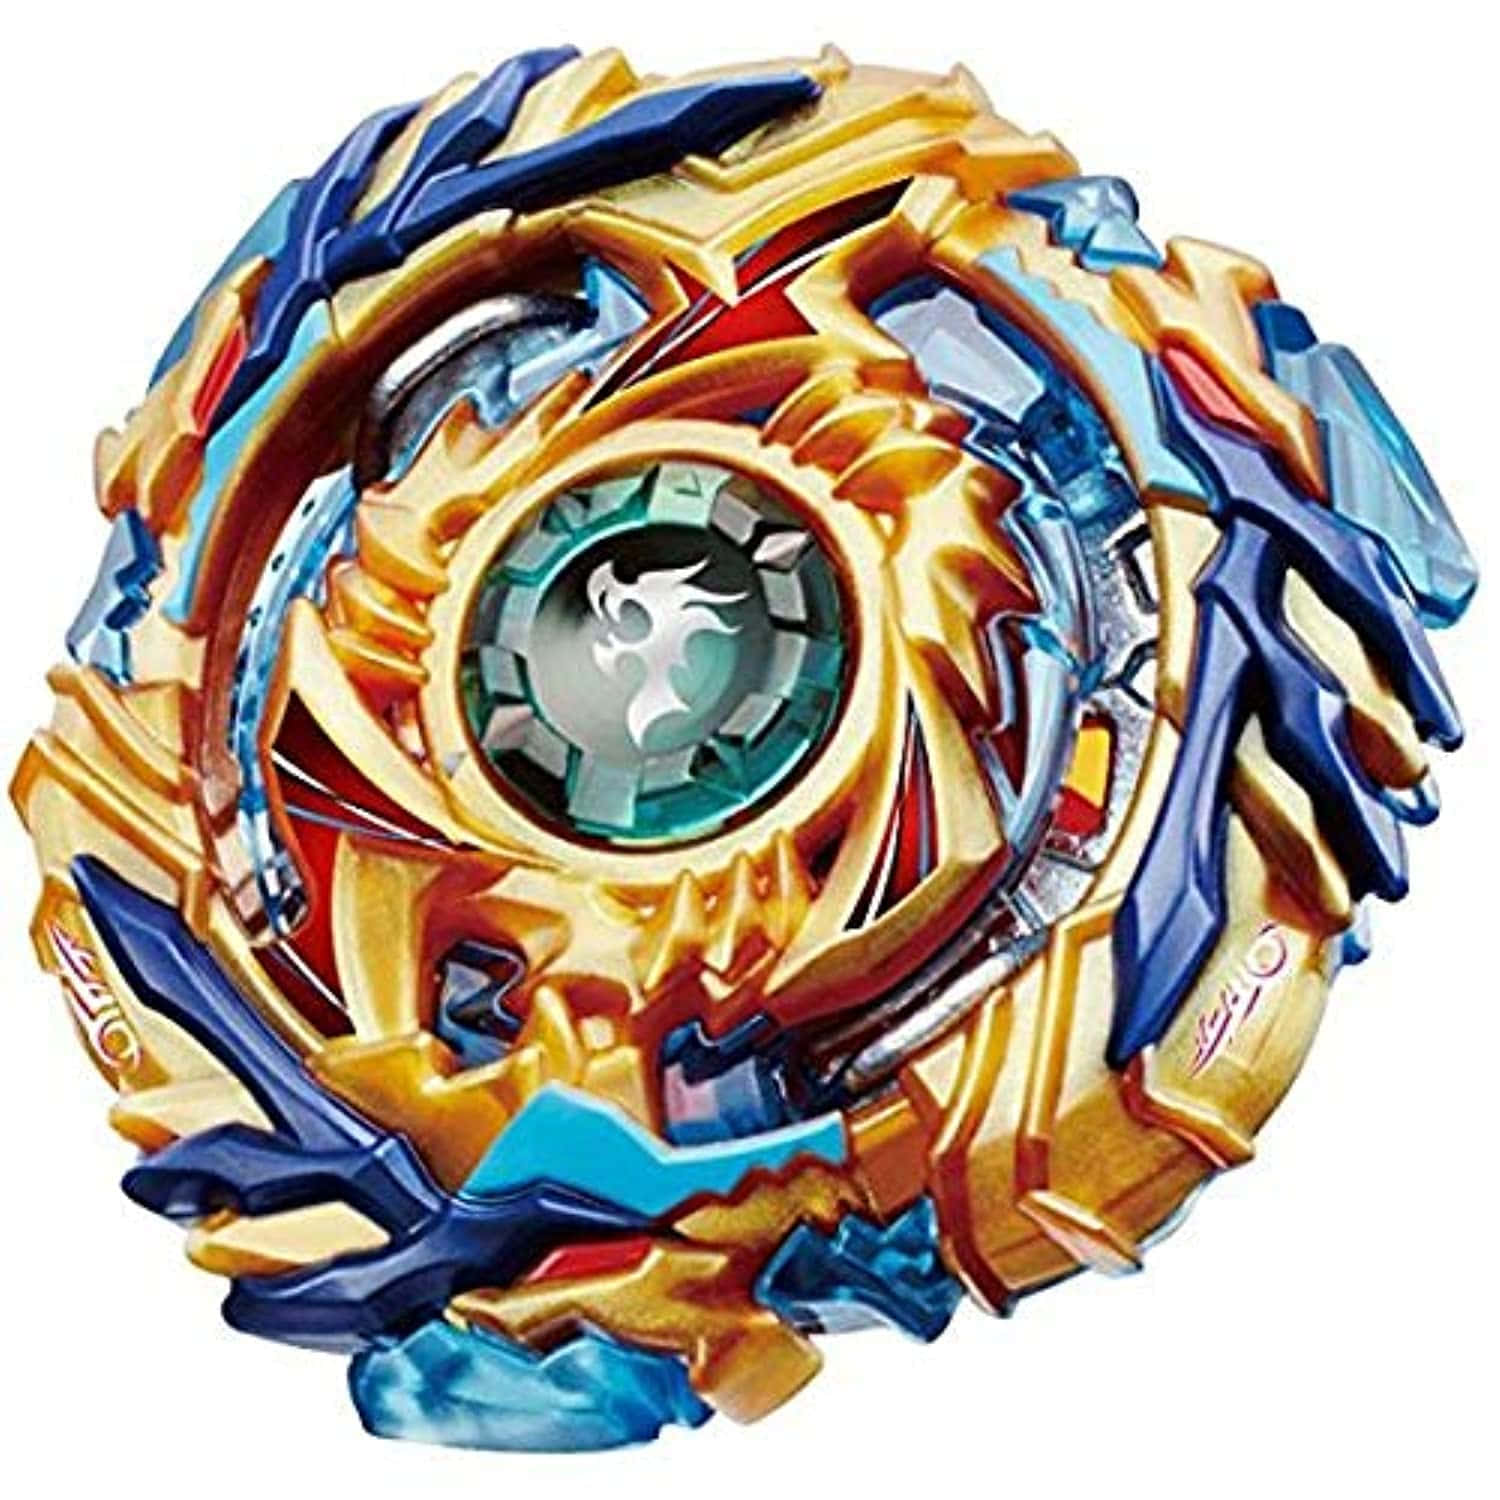 Spin the Dragoon into victory with Beyblade Burst.